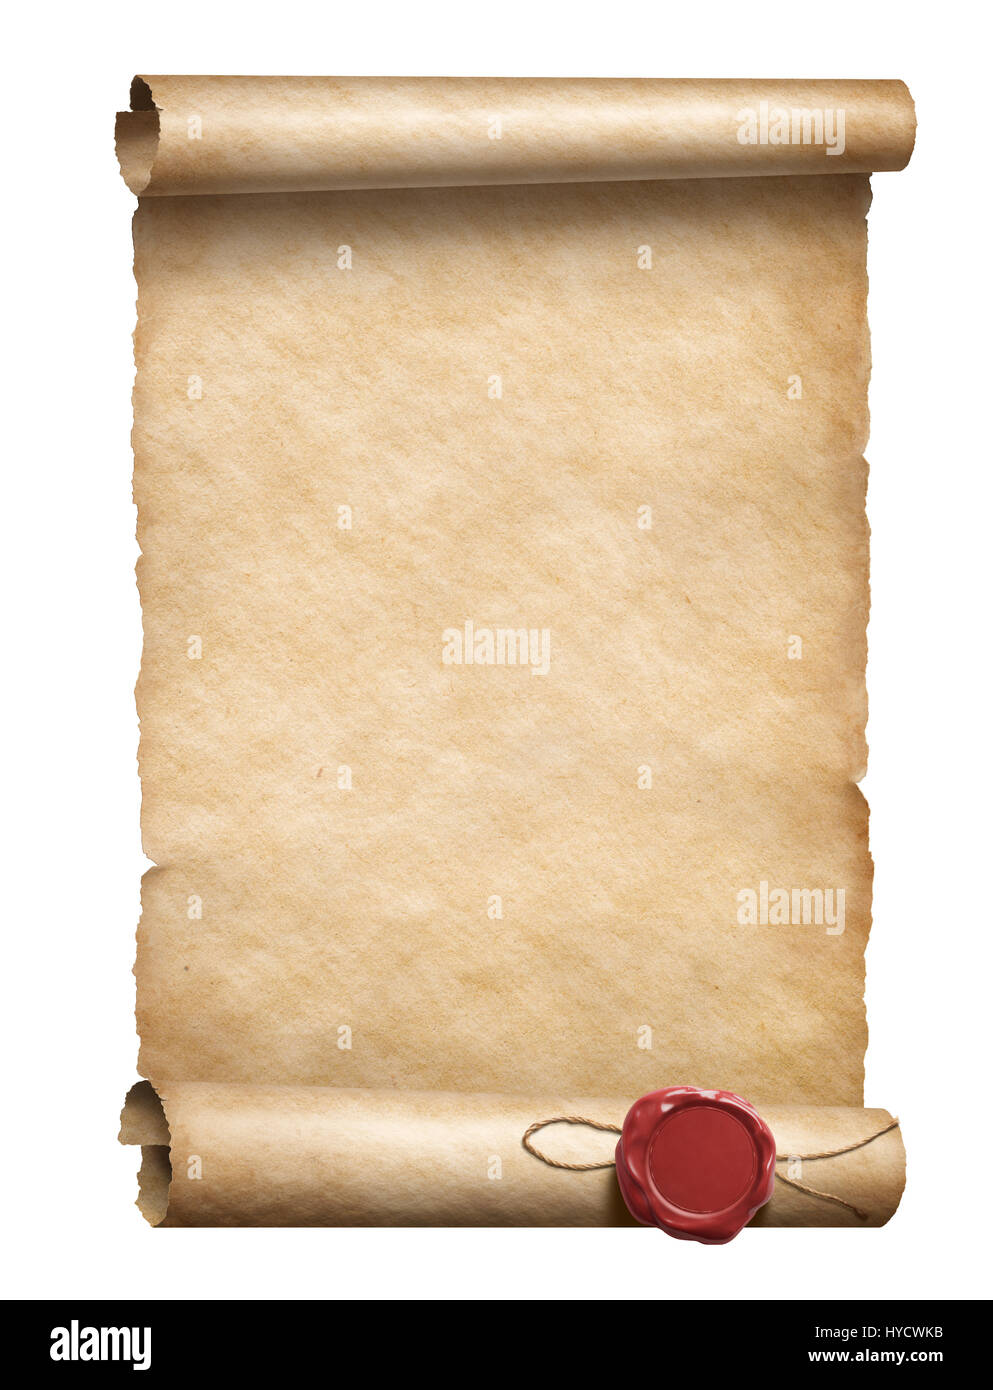 scroll with wax seal 3d illustration Stock Photo